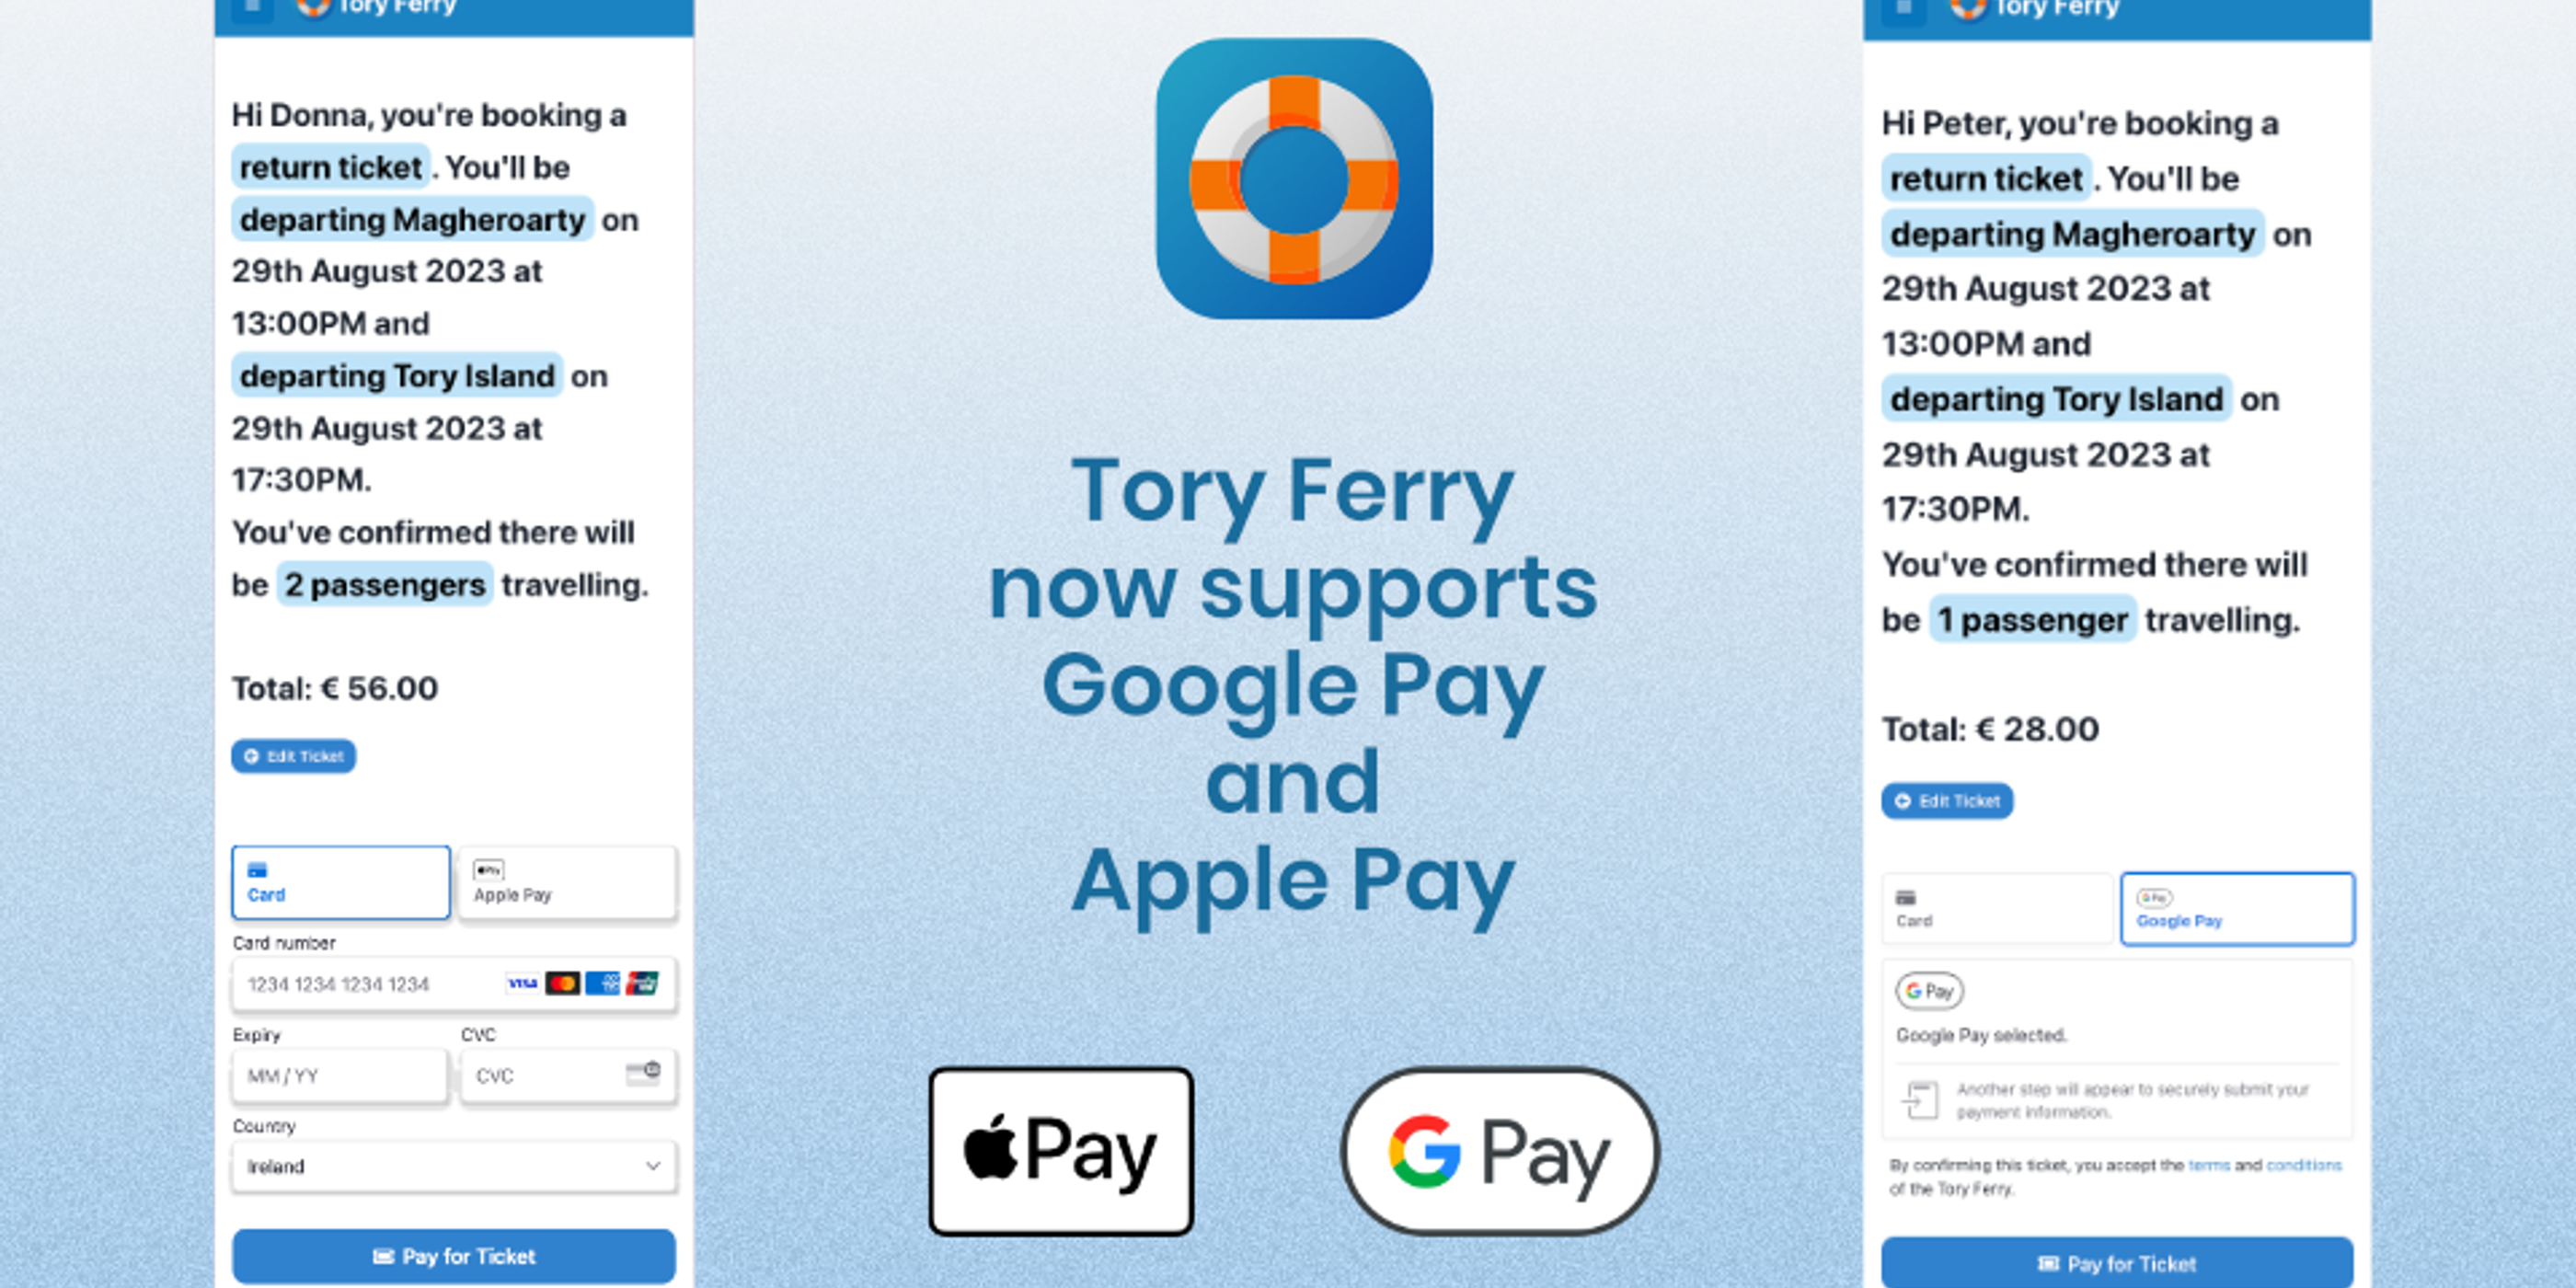 Tory Ferry supports Apple Pay and Google Pay